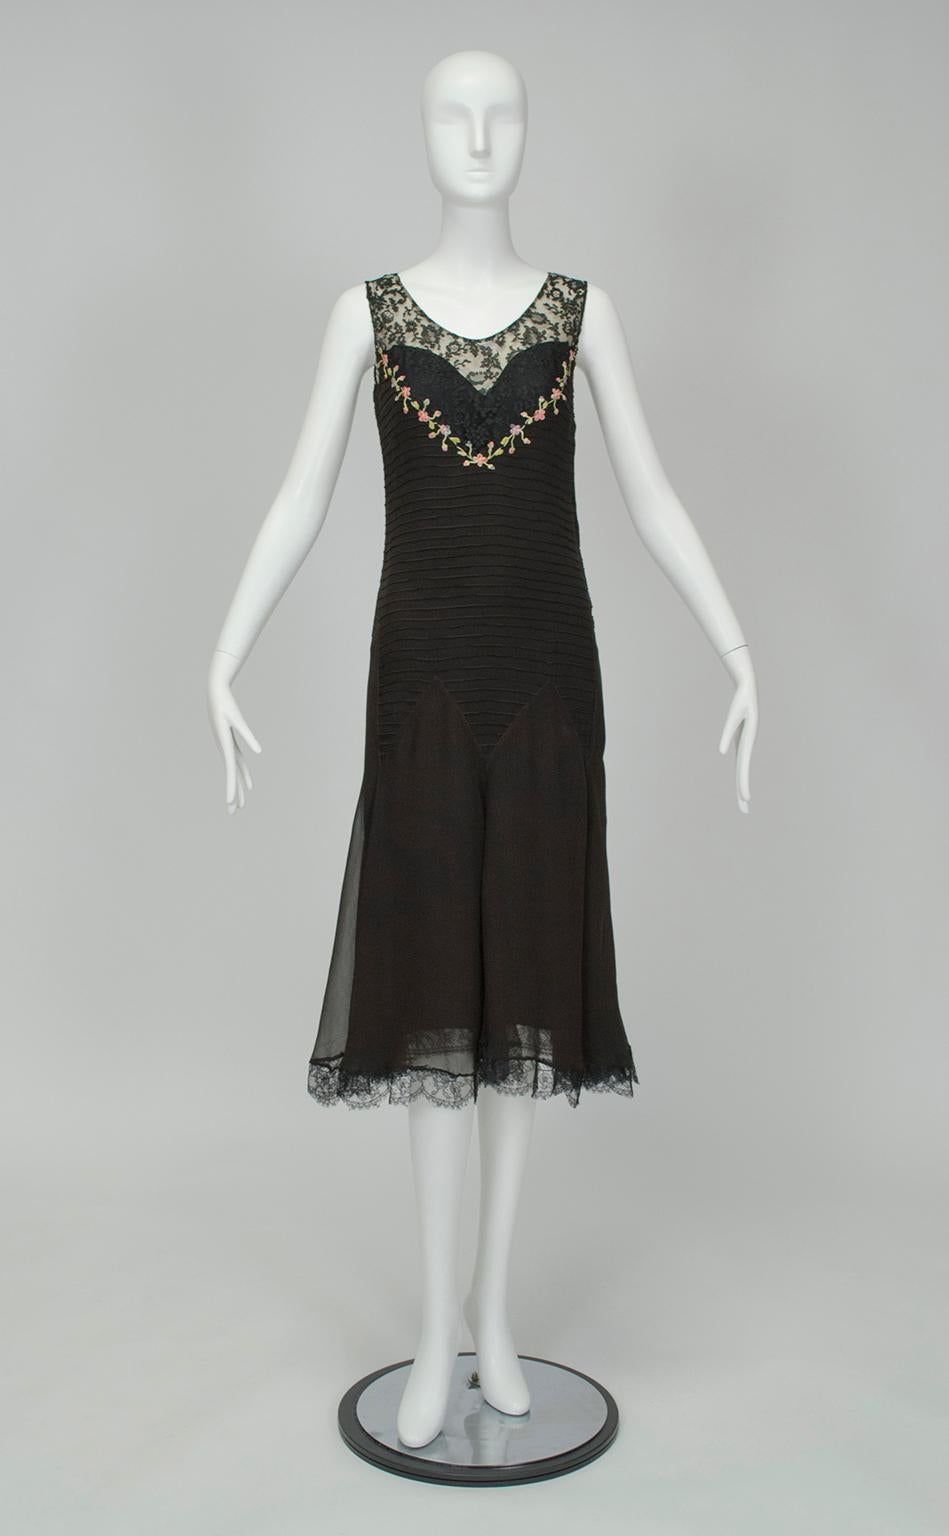 Unlike many 1920s dresses, the embellishment on this piece may not be immediately obvious. Closer inspection reveals that the dropped bodice is actually entirely horizontally pintucked and joined to the skirt with a zigzag waist seam. A fetching